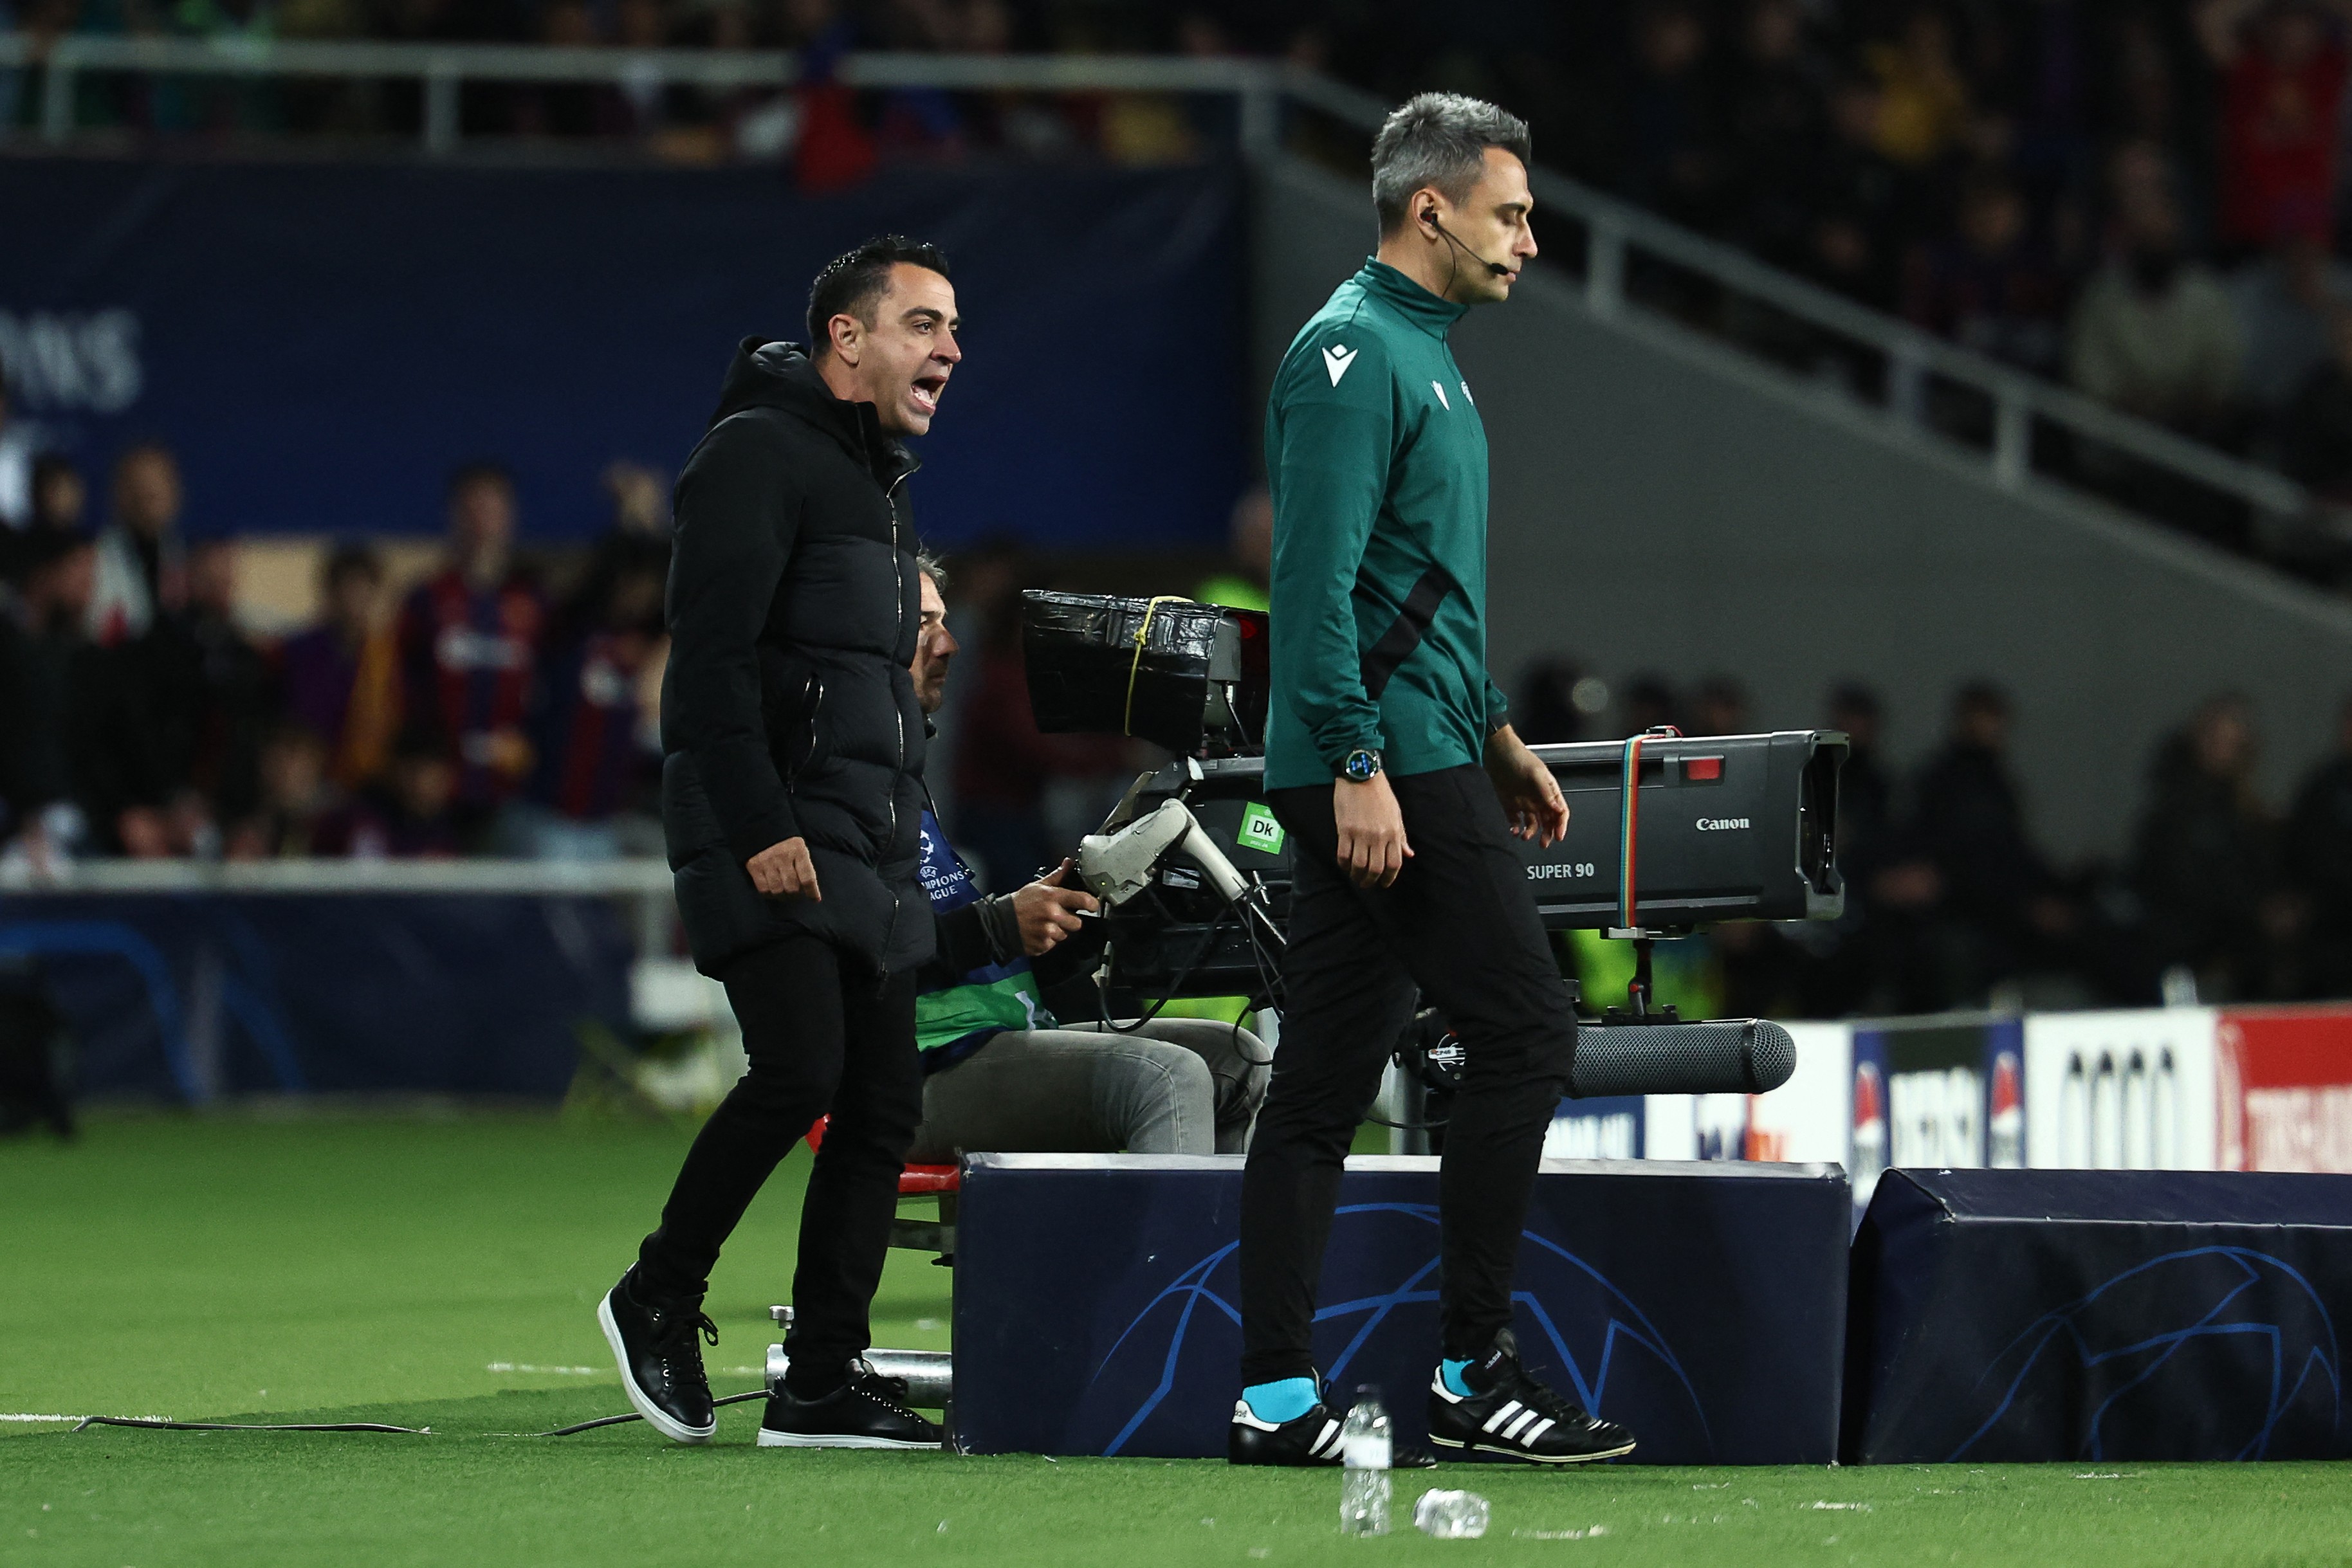 Xavi now has more red cards as a manager at Barcelona than he did as a player, despite playing for 22 years and managing just one and a half.